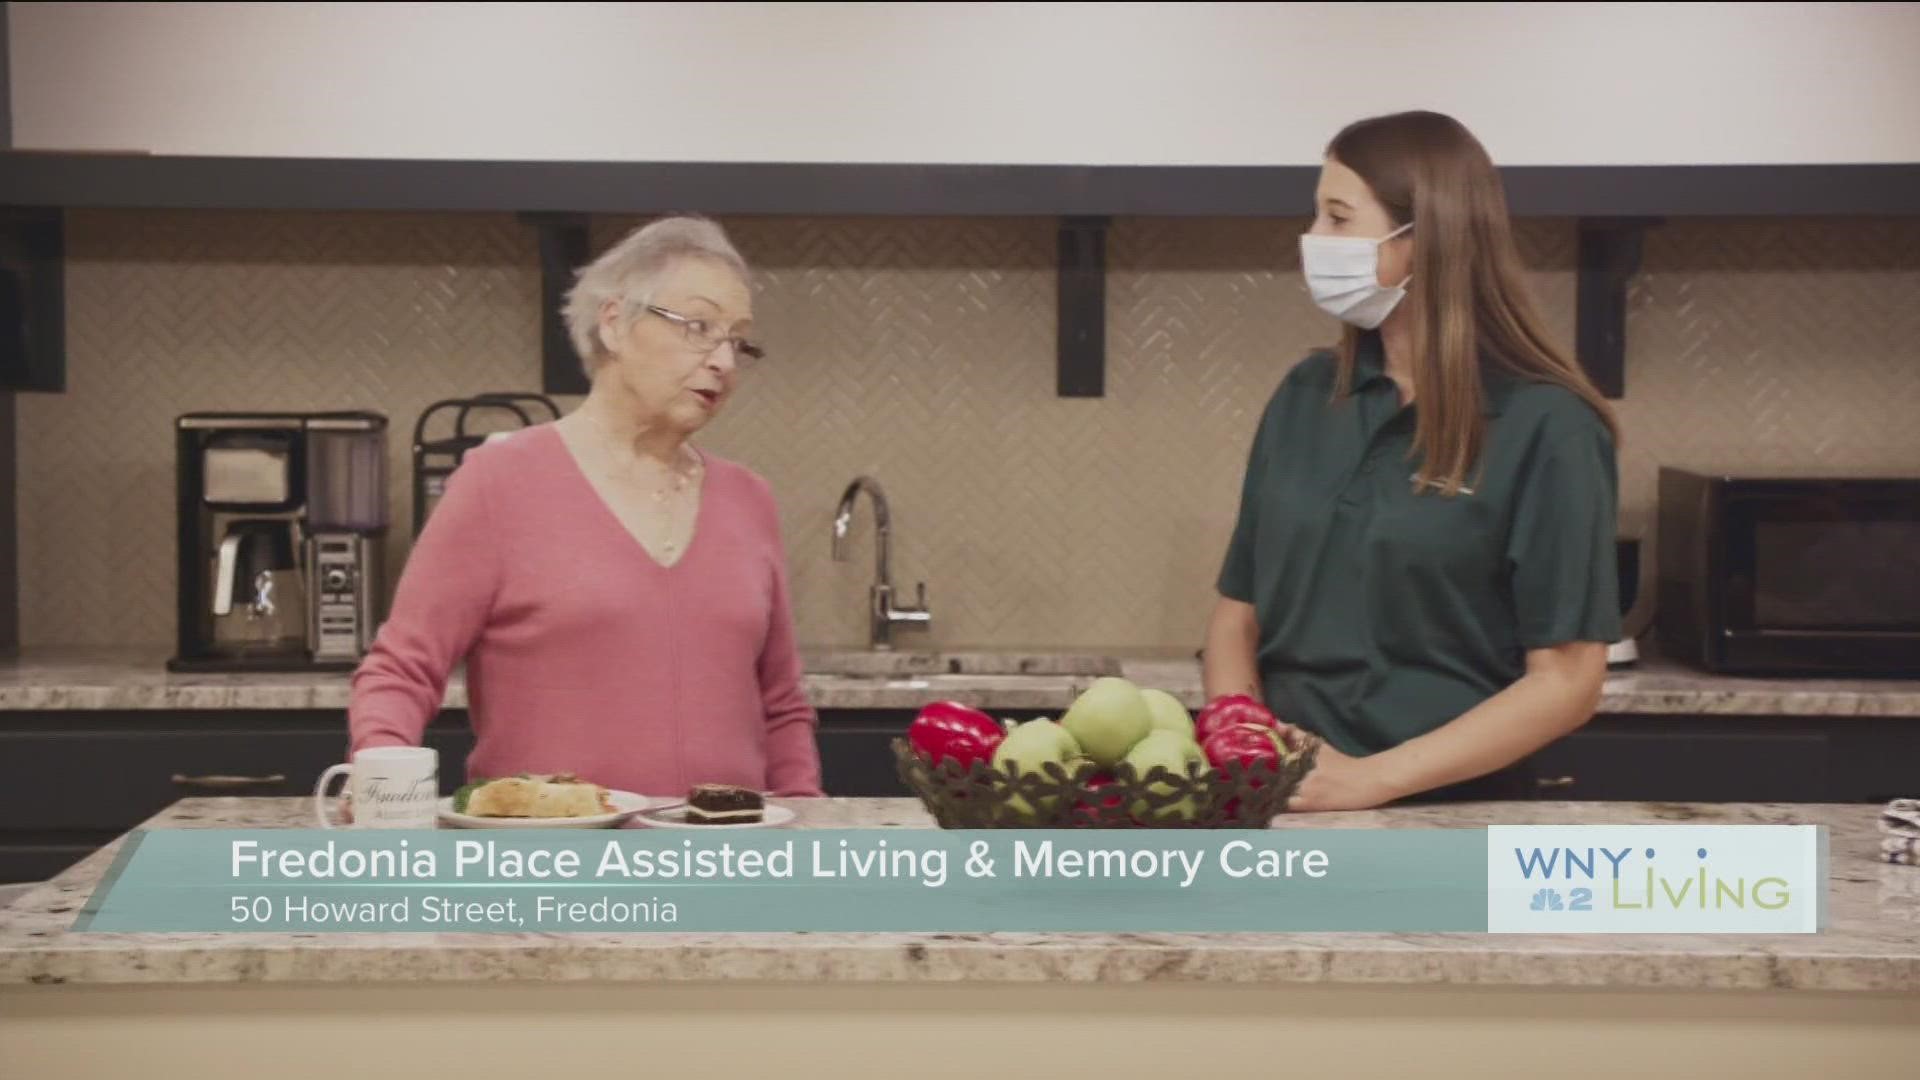 WNY Living - November 12 - Fredonia Place Assisted Living & Memory Care (THIS VIDEO IS SPONSORED BY FREDONIA PLACE ASSISTED LIVING & MEMORY CARE)